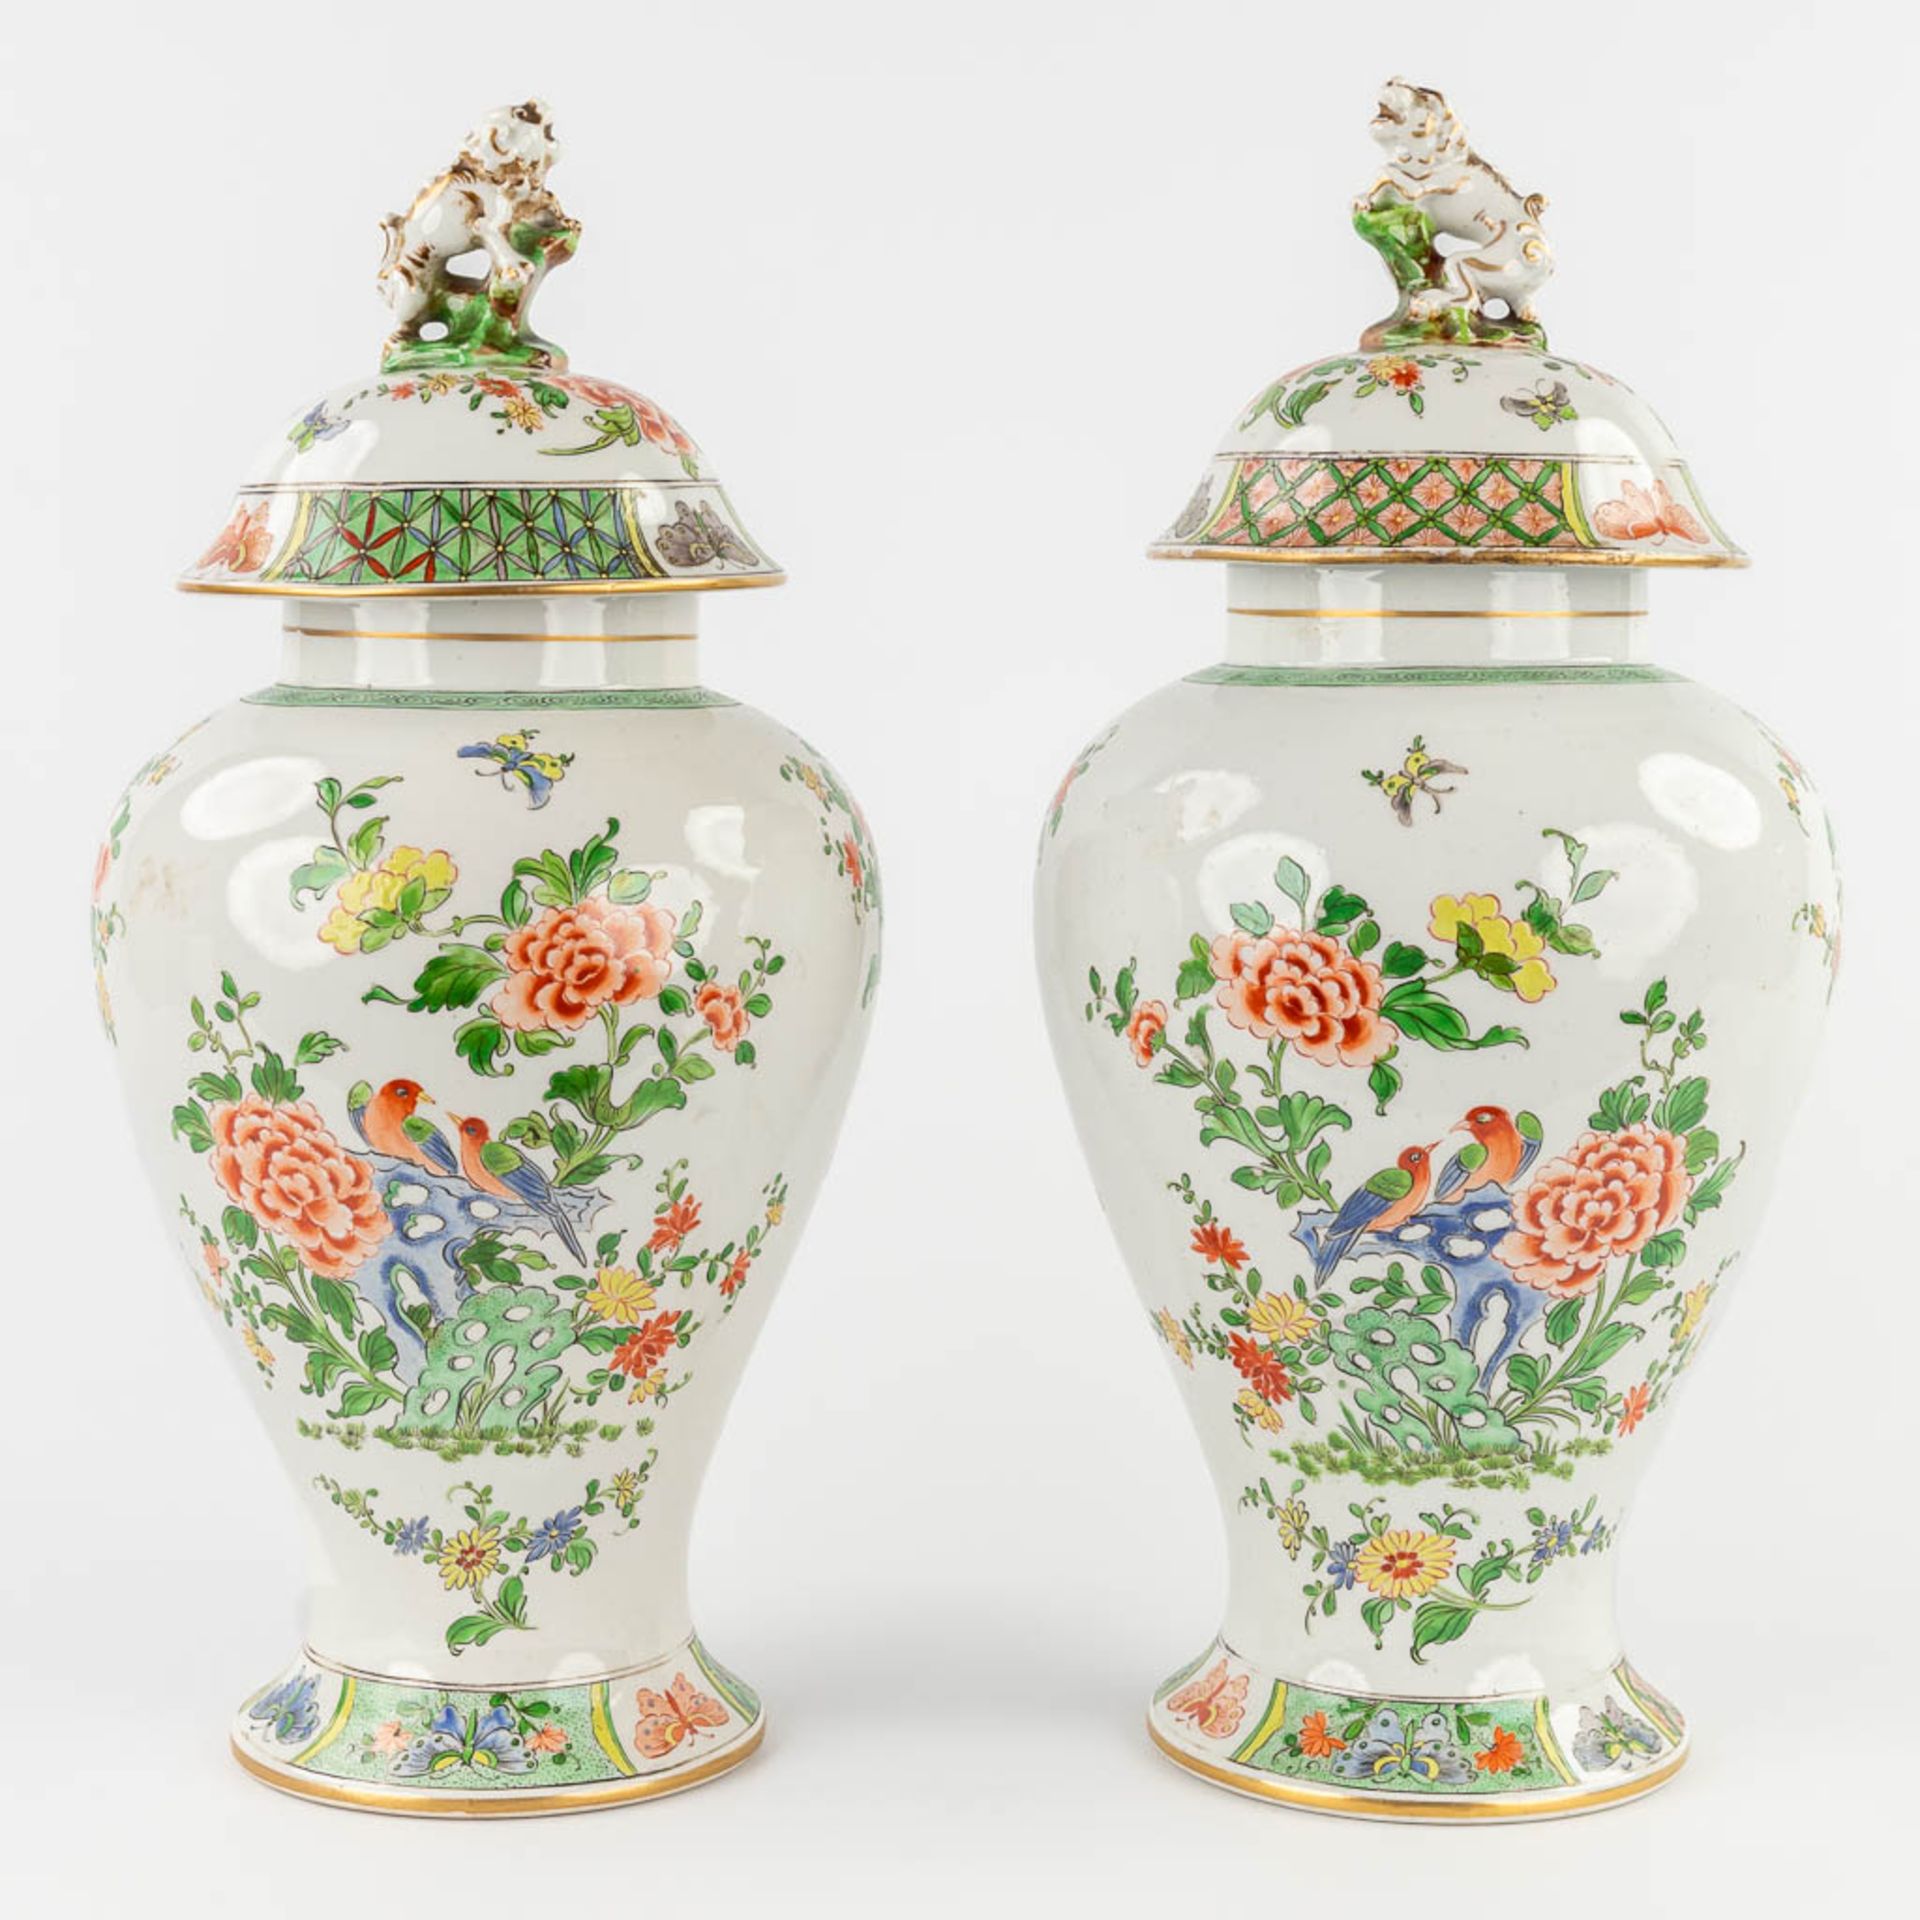 Samson, a pair of Oriental-inspired vases with hand-painted decor. 19th C. (H:42 x D:20 cm)